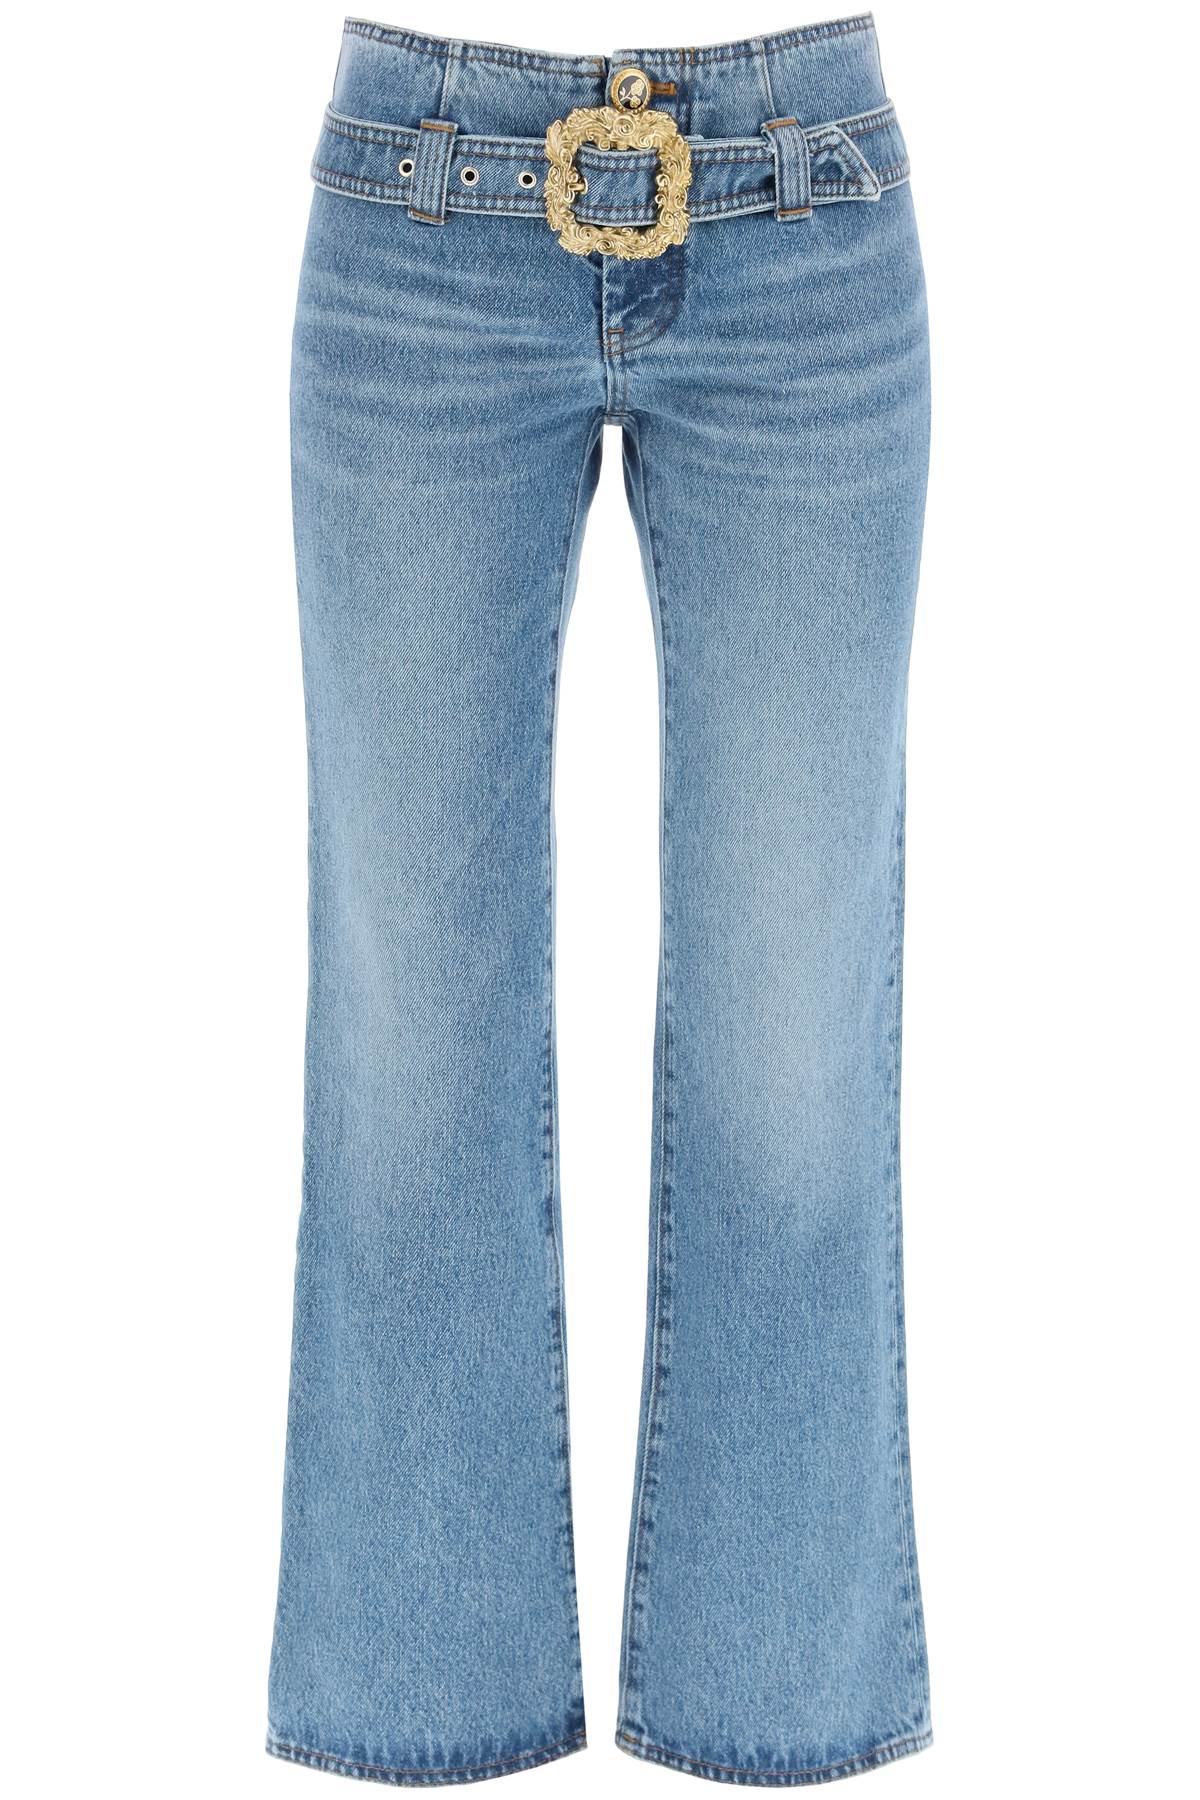 Cormio Belted Jeans